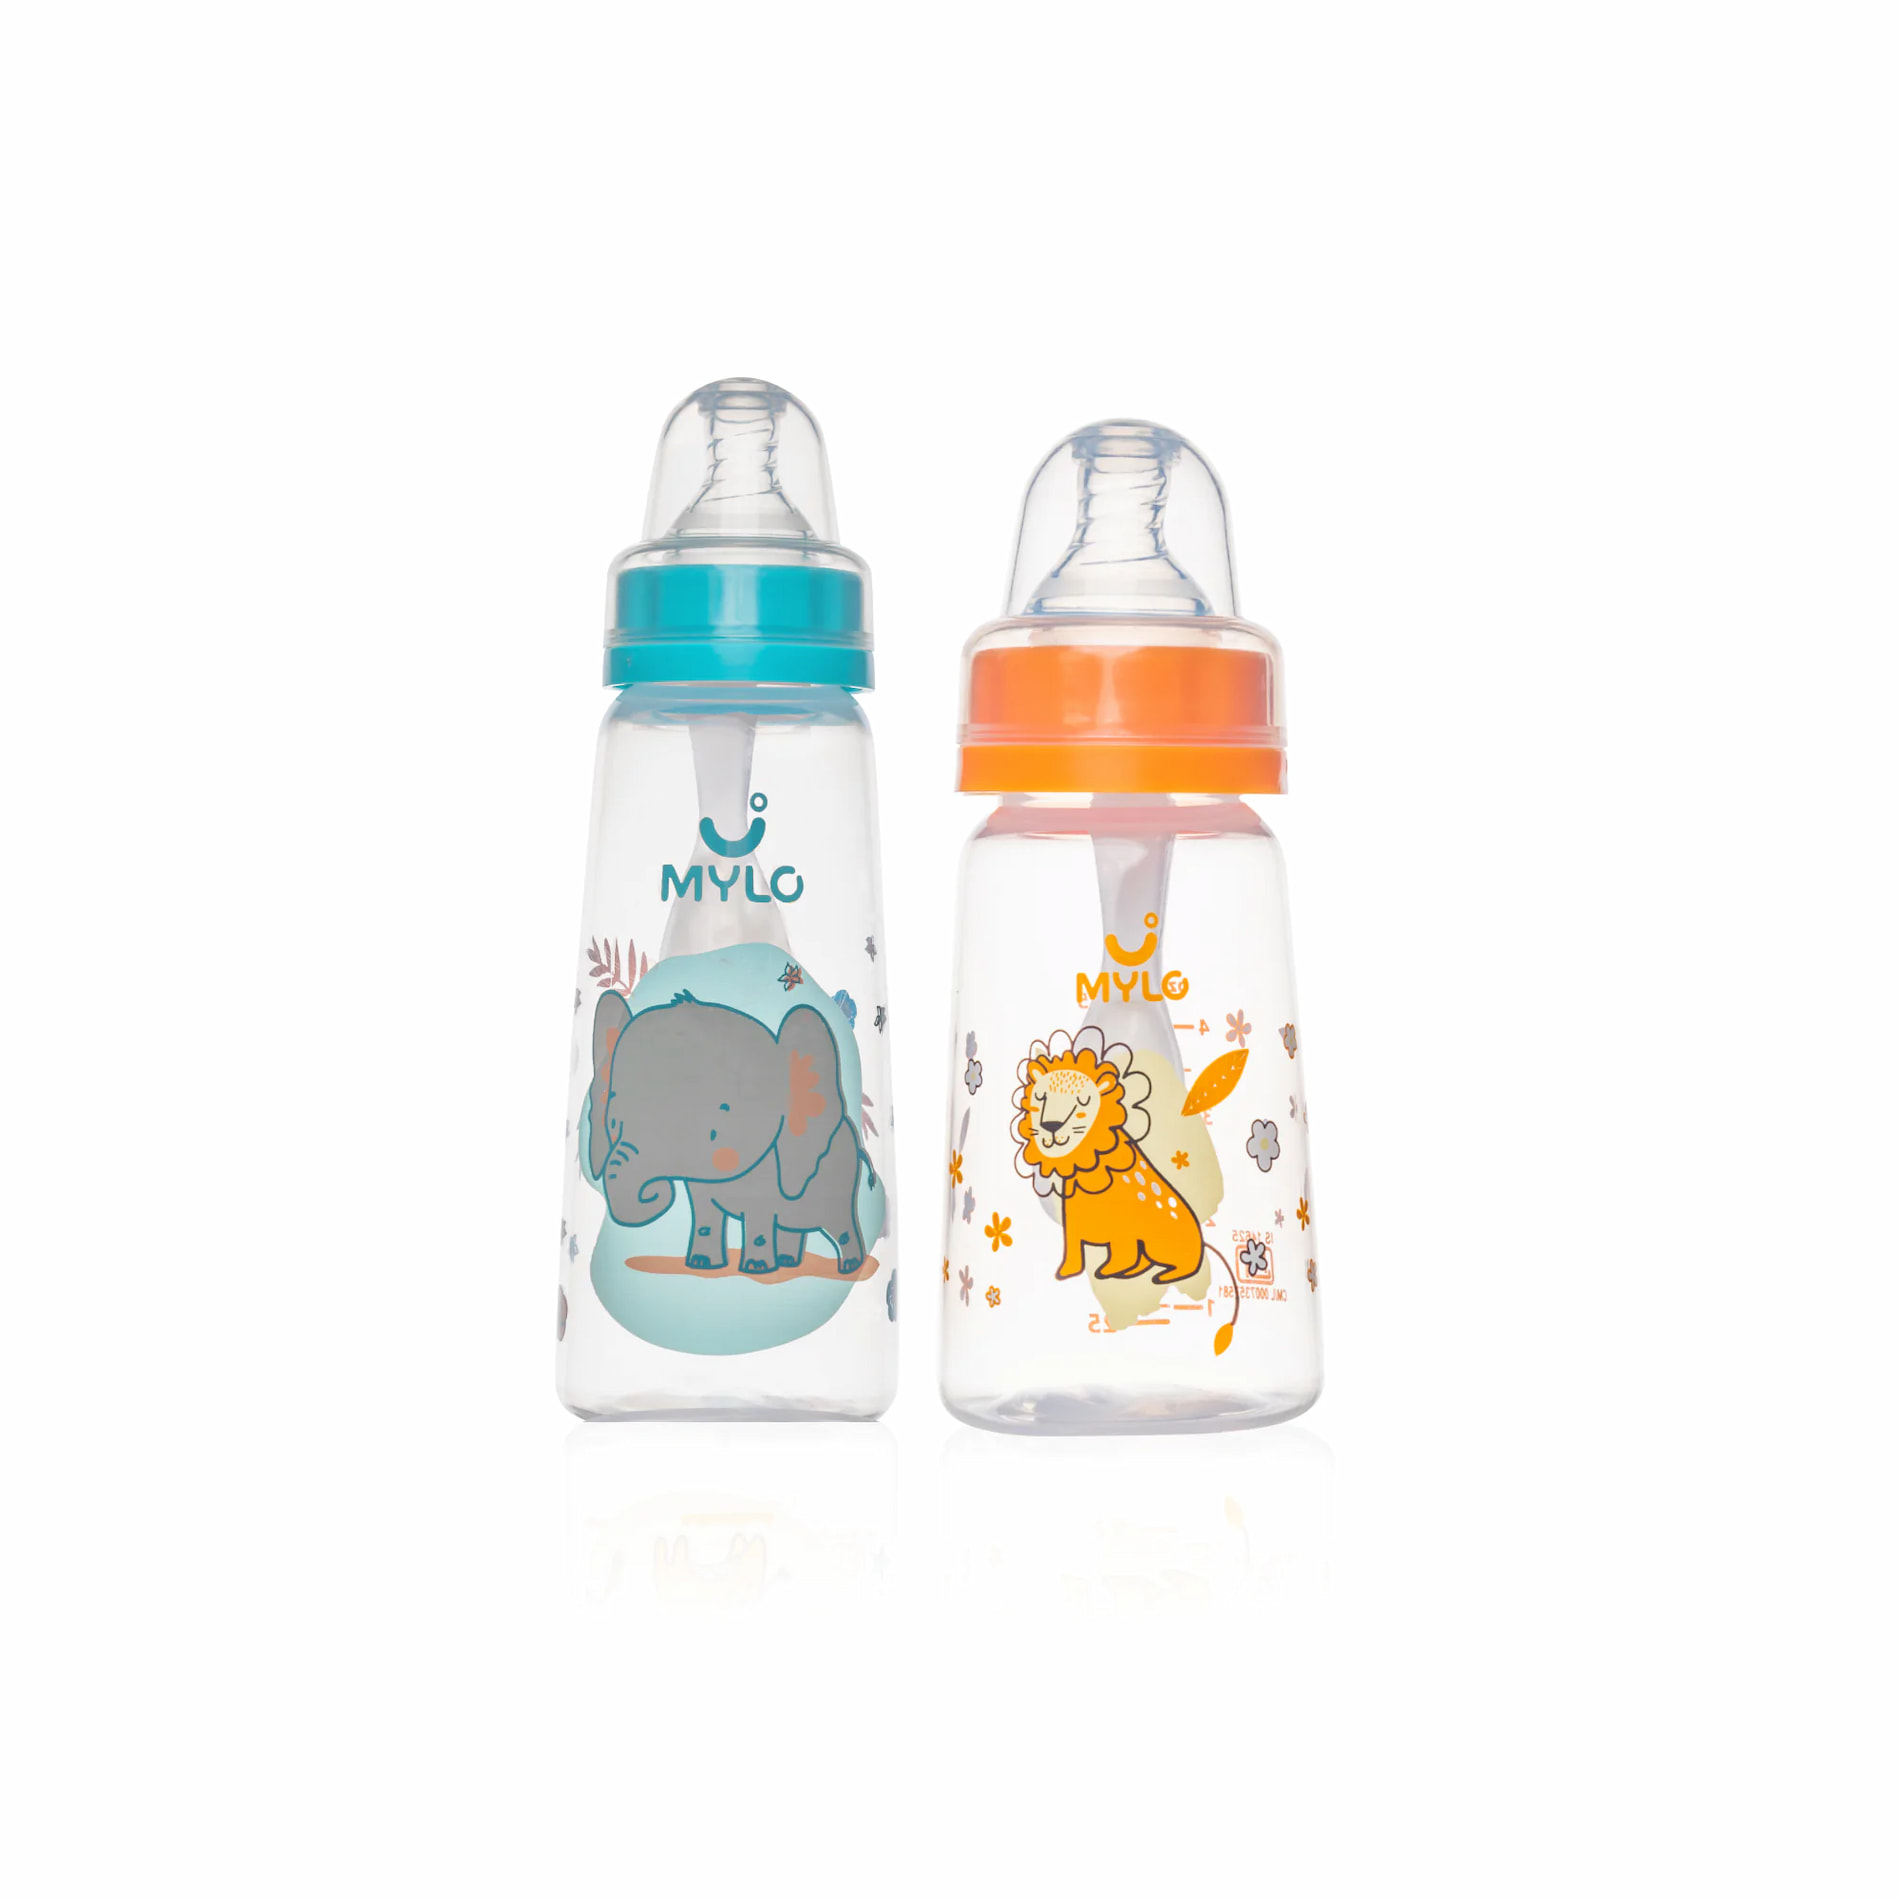 Mylo Feels Natural Baby Bottle – 125ml & 250 ml - BPA Free with Anti-Colic Nipple-Pack of 2- (Lion & Elephant)